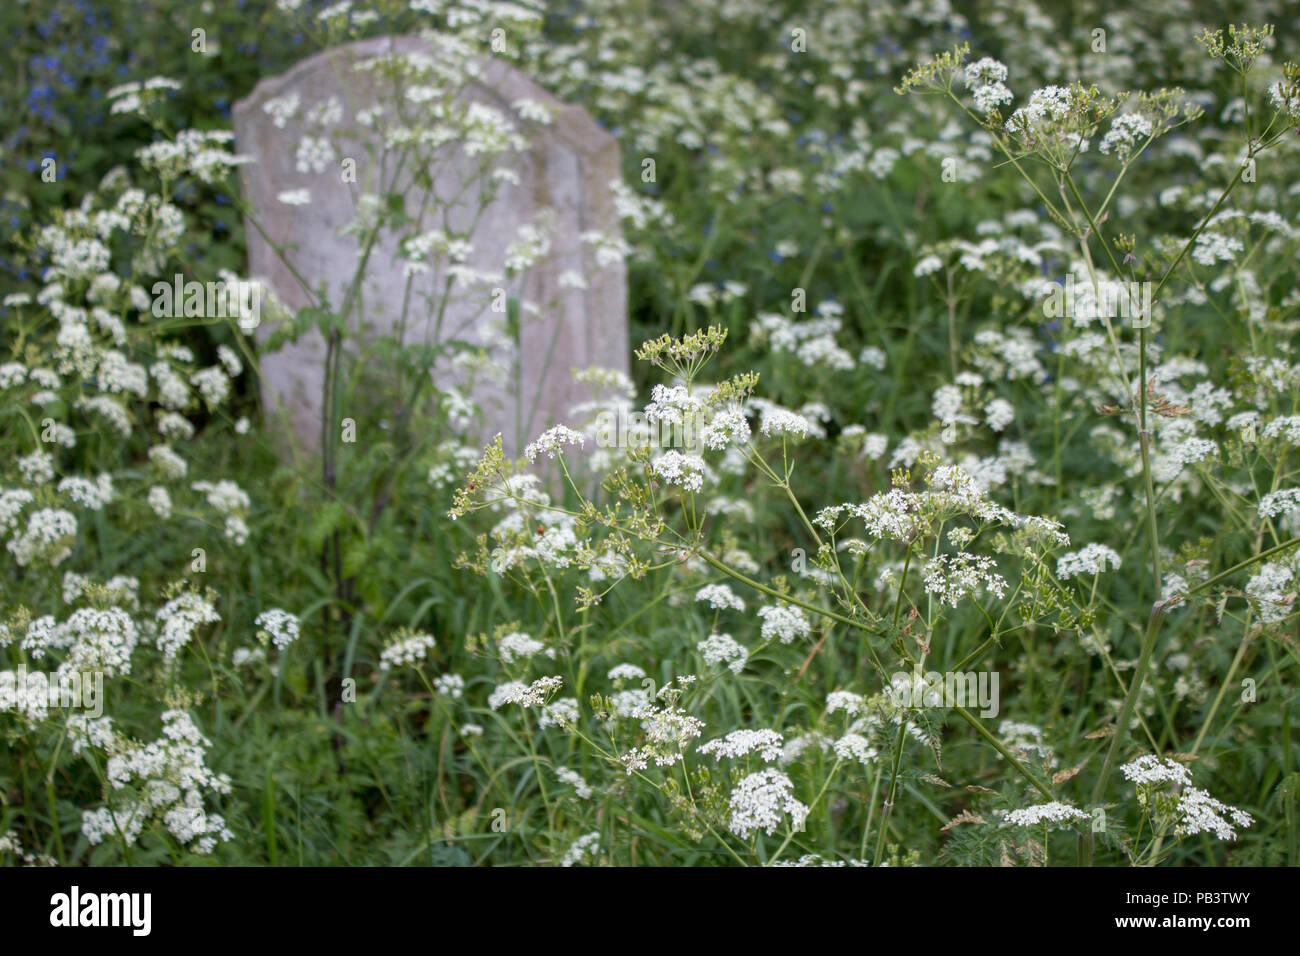 A tombstone hidden in the wildslowers in Brompton Cemetery, London, England, UK, Europe. Stock Photo